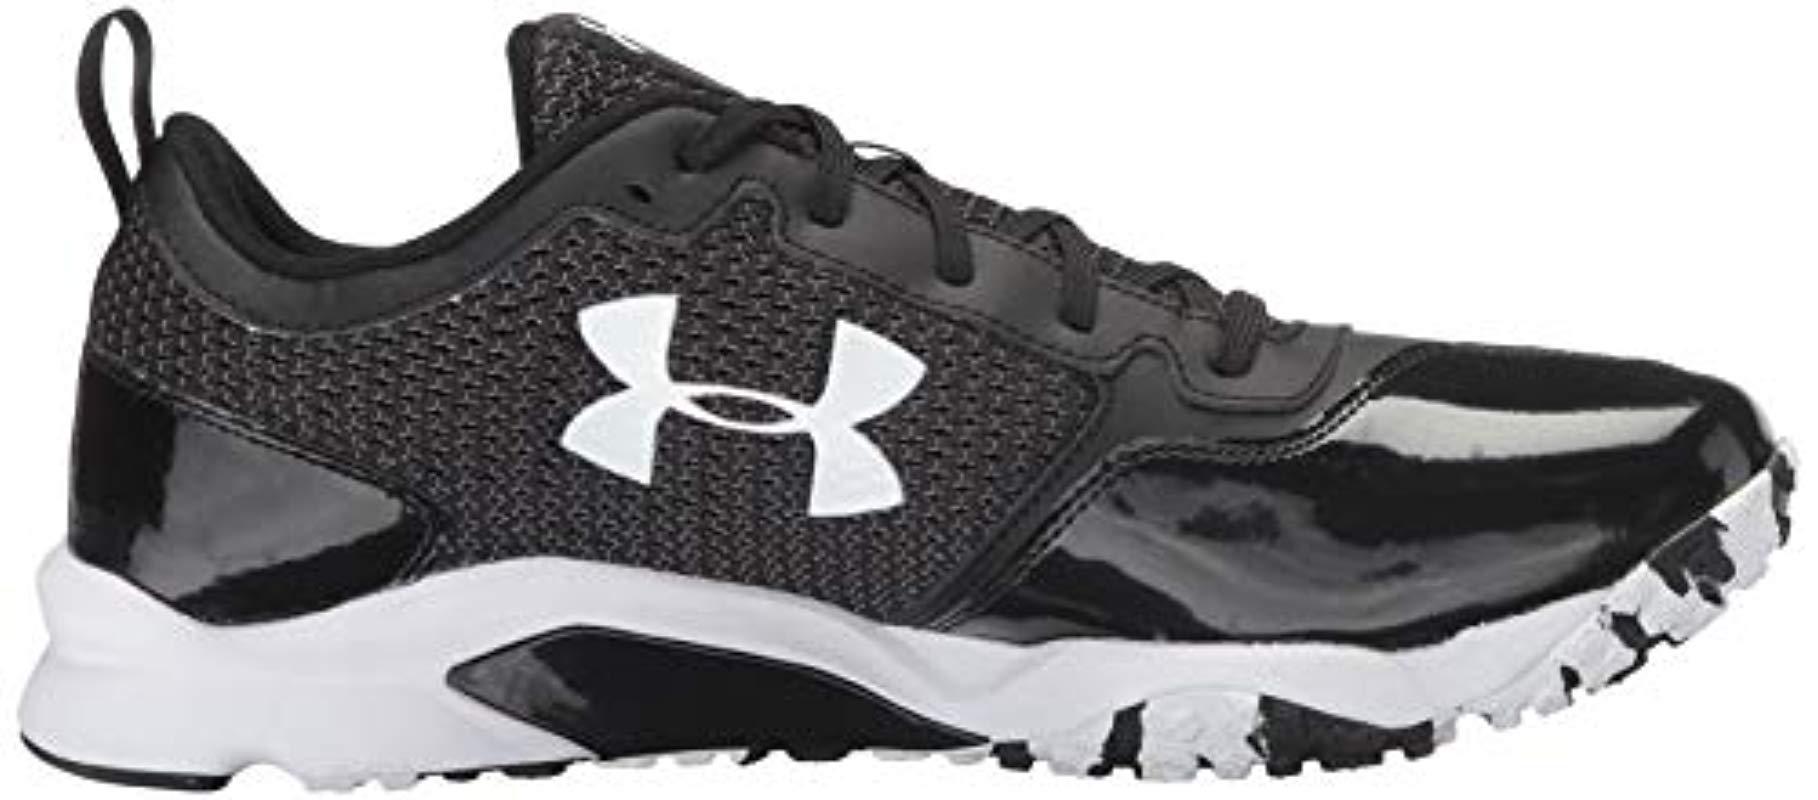 New UNder Armour Men's Ultimate Turf Trainer 1292146-001 